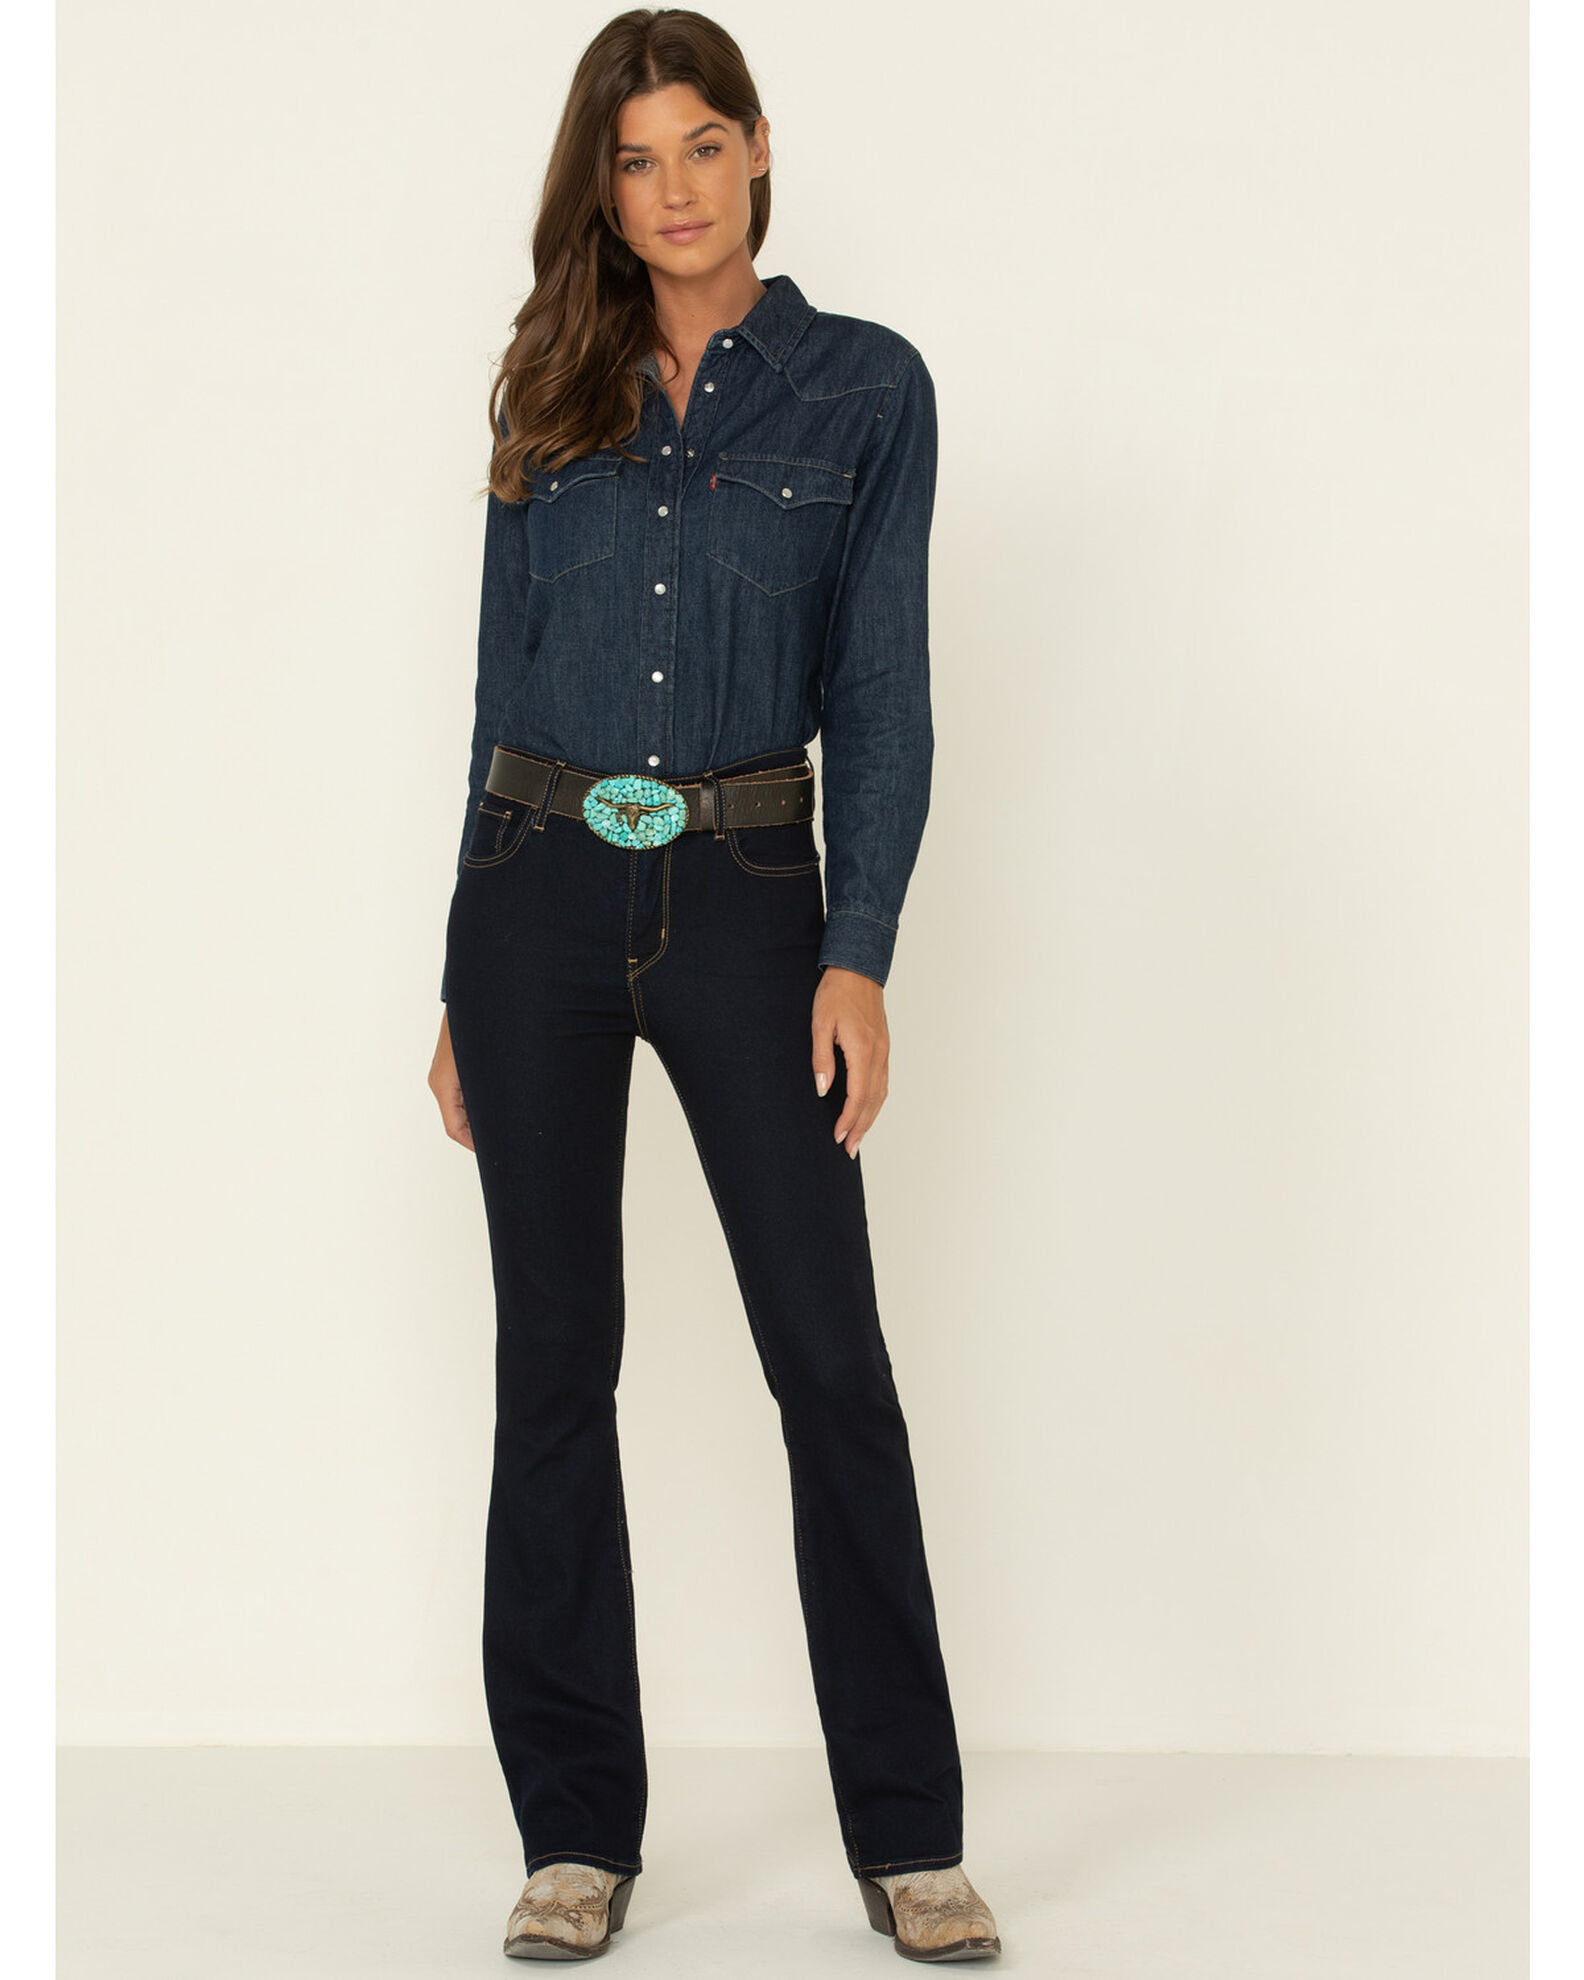 Tænk fremad søskende suspendere Levi's Women's Dark Horse High Rise 725 Bootcut Jeans - Country Outfitter